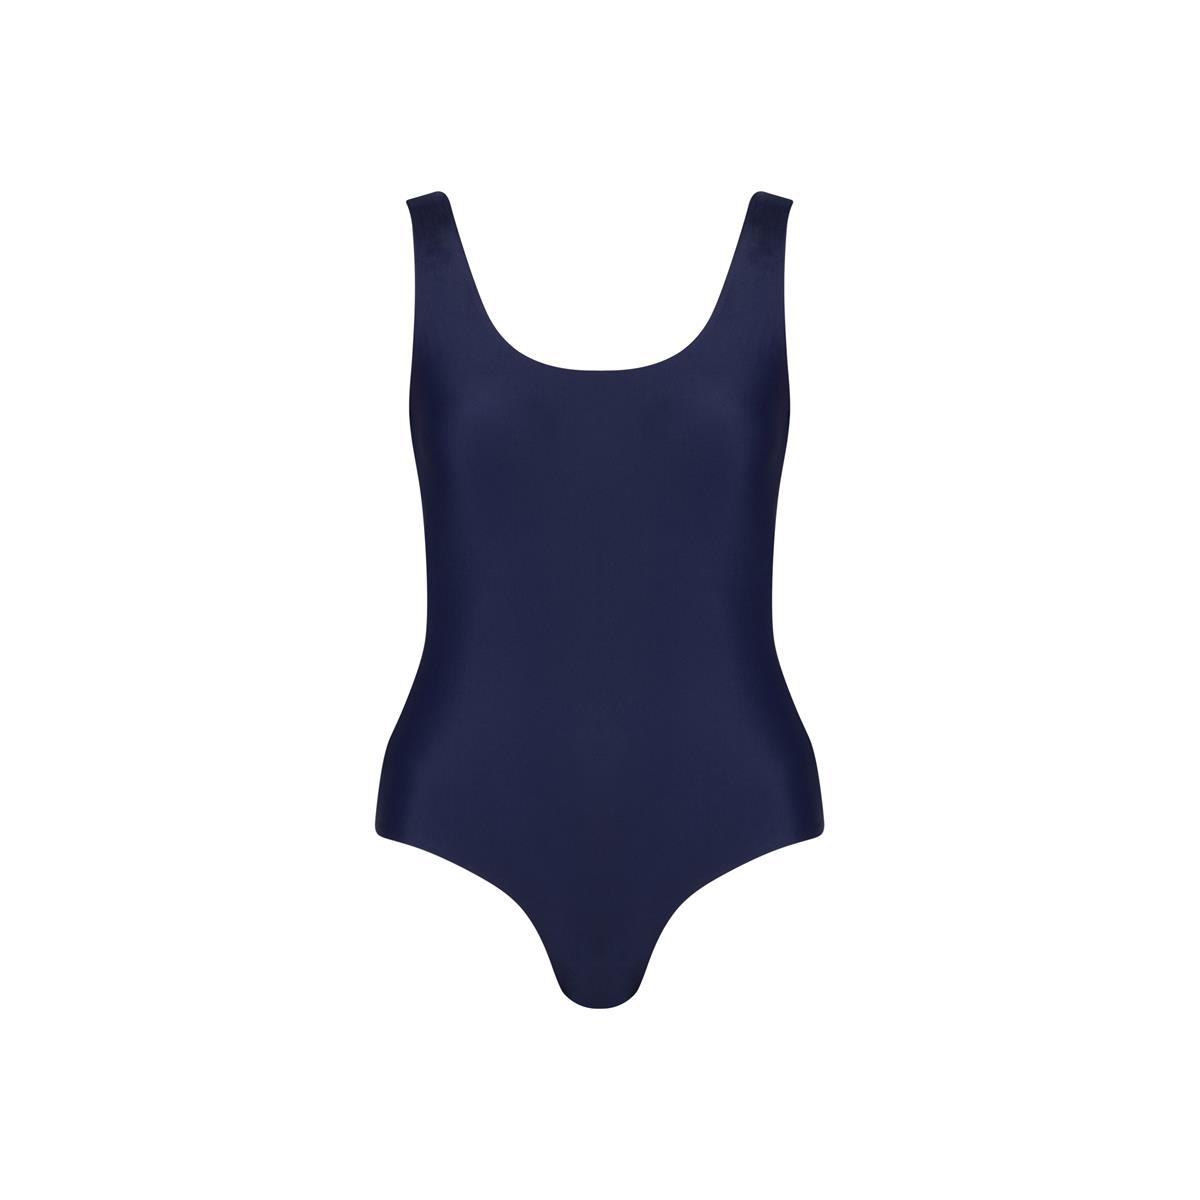 MARGARET AND HERMIONE_SS19_Swimsuit No.5_night_EUR 159,00